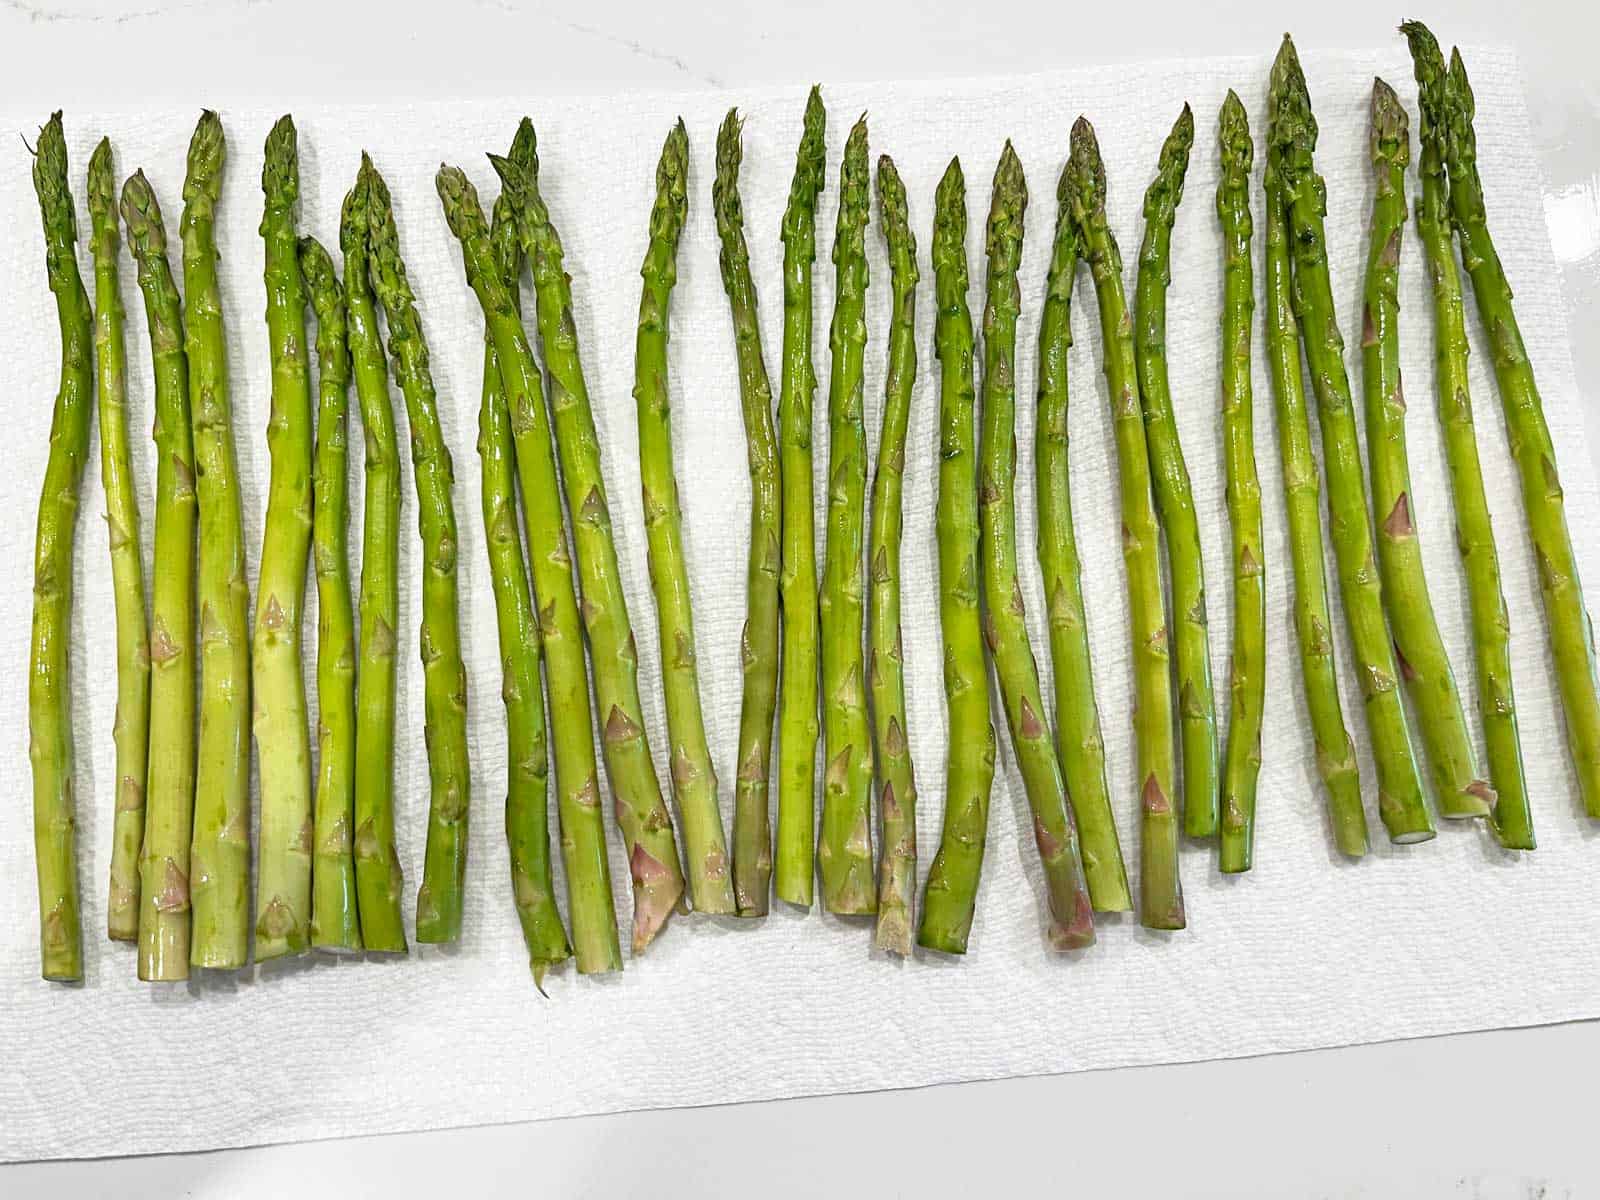 Drying the asparagus on paper towels.